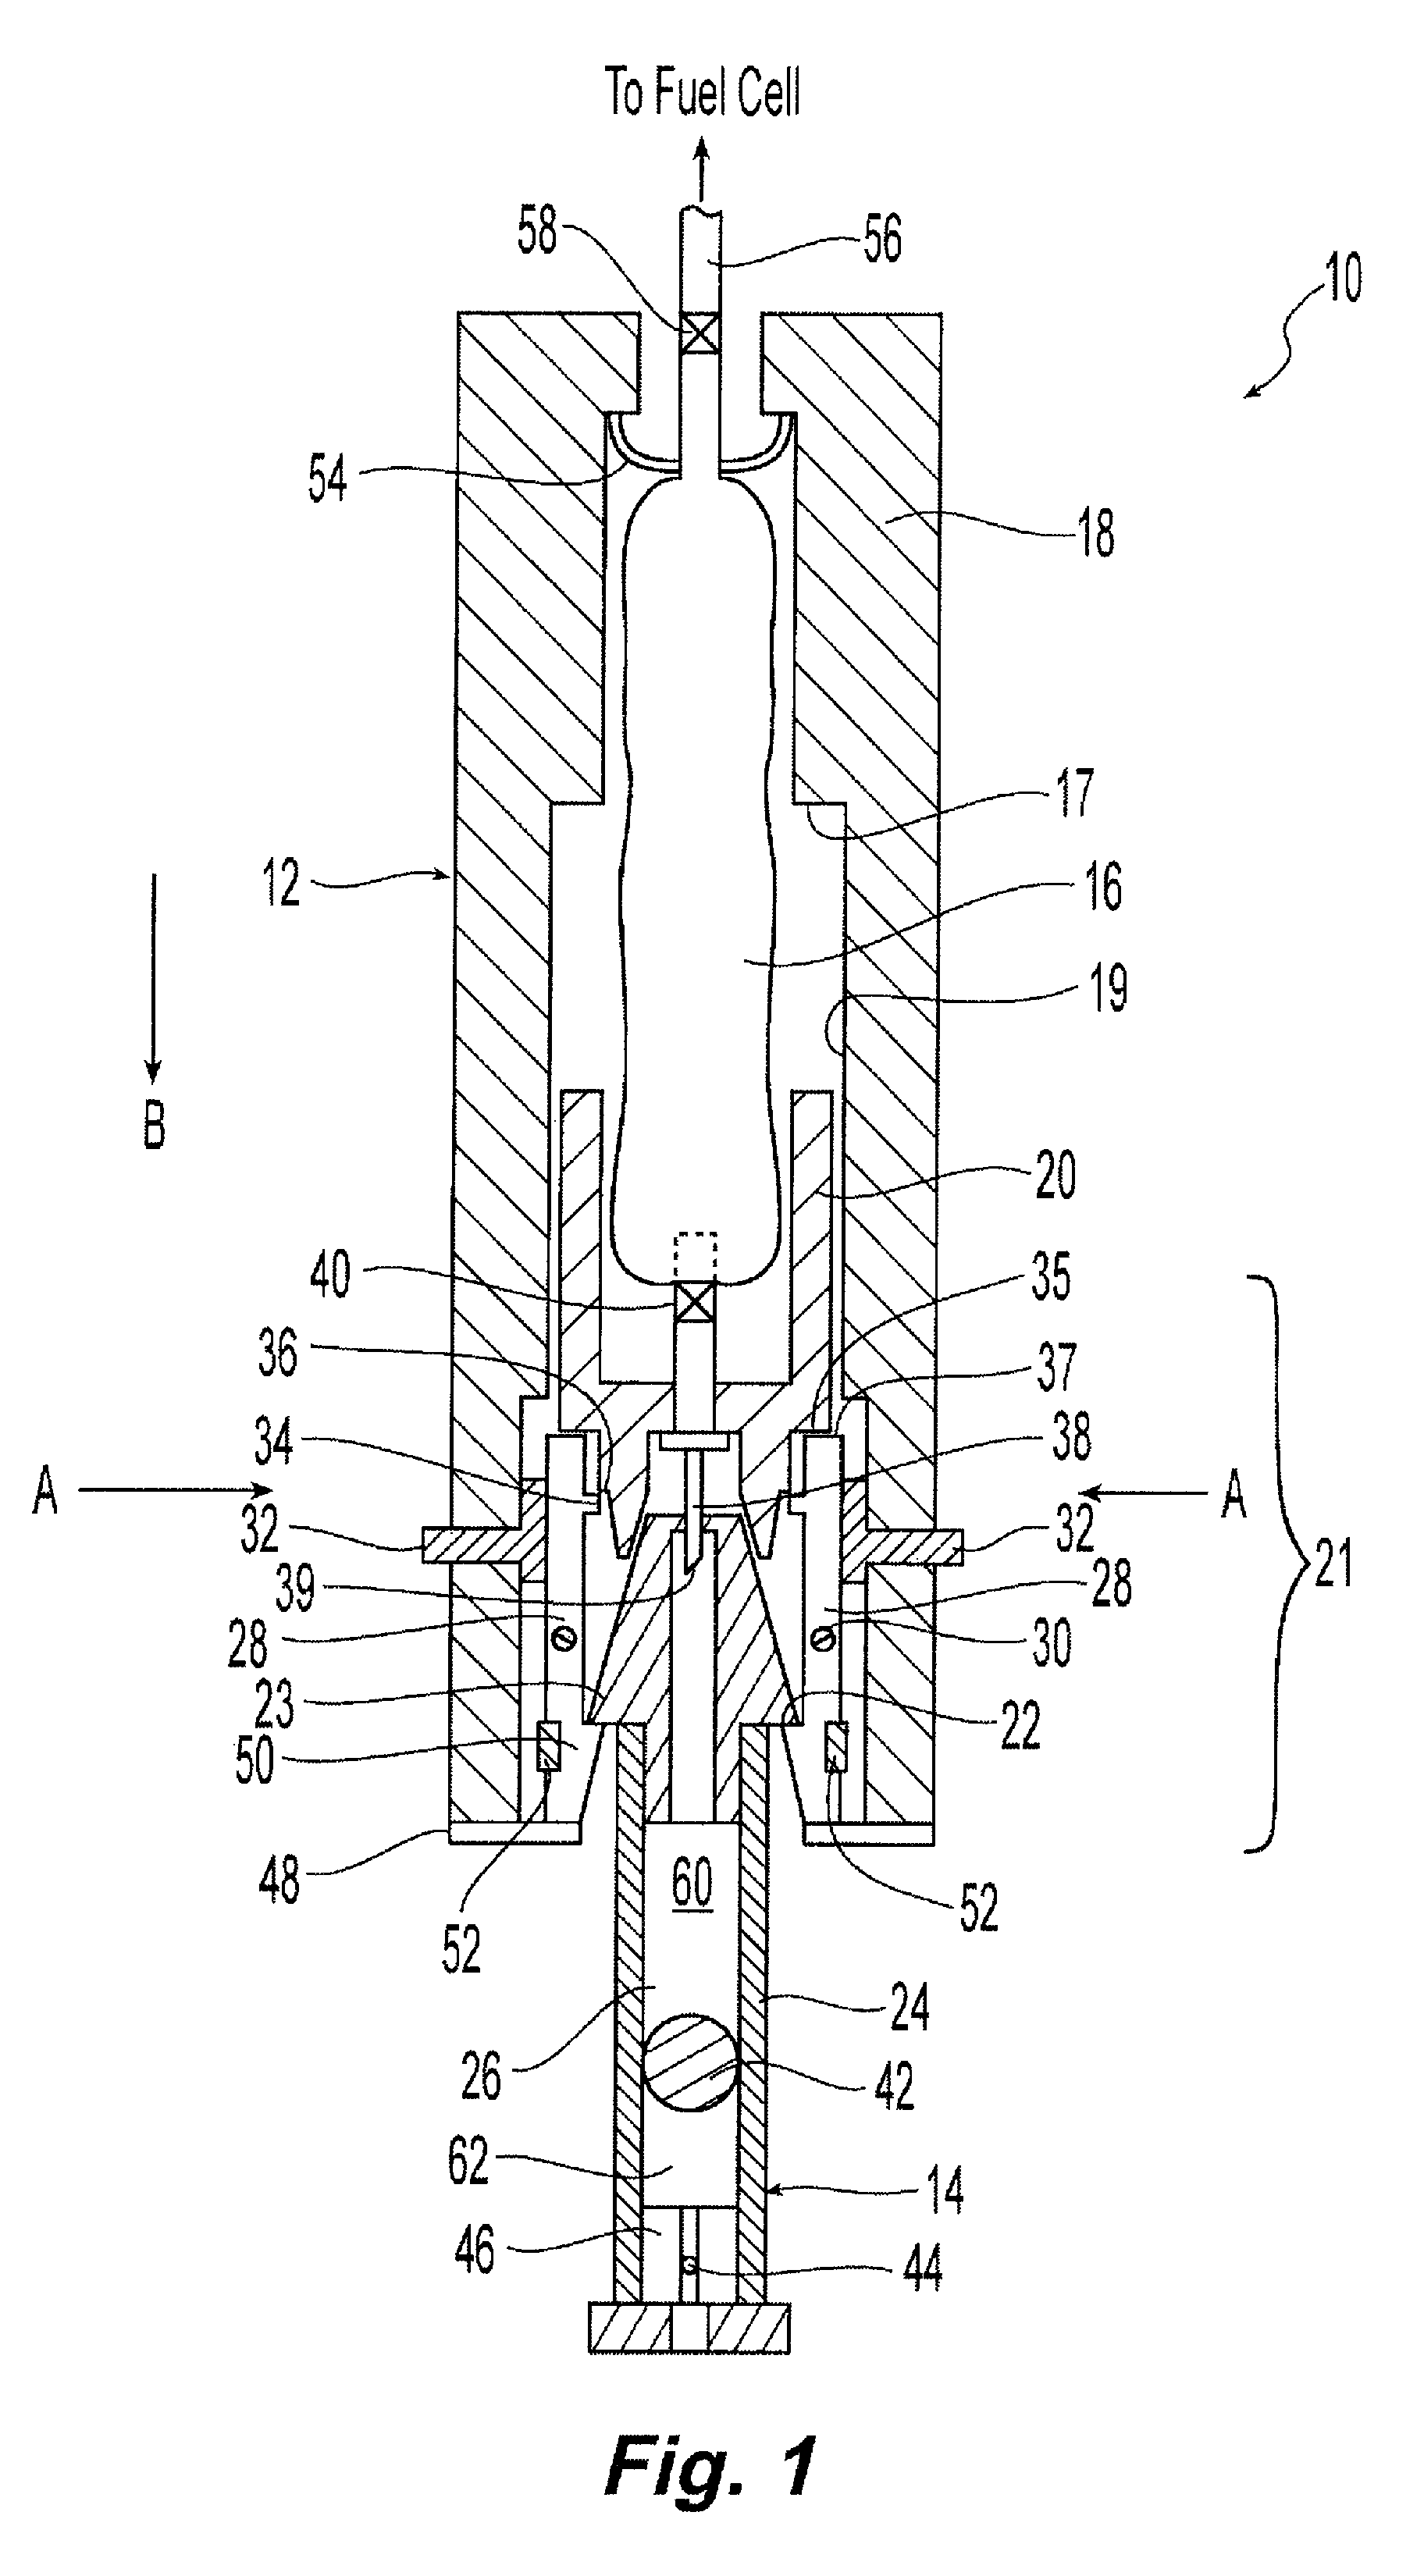 Device for refilling a fuel cartridge for a fuel cell